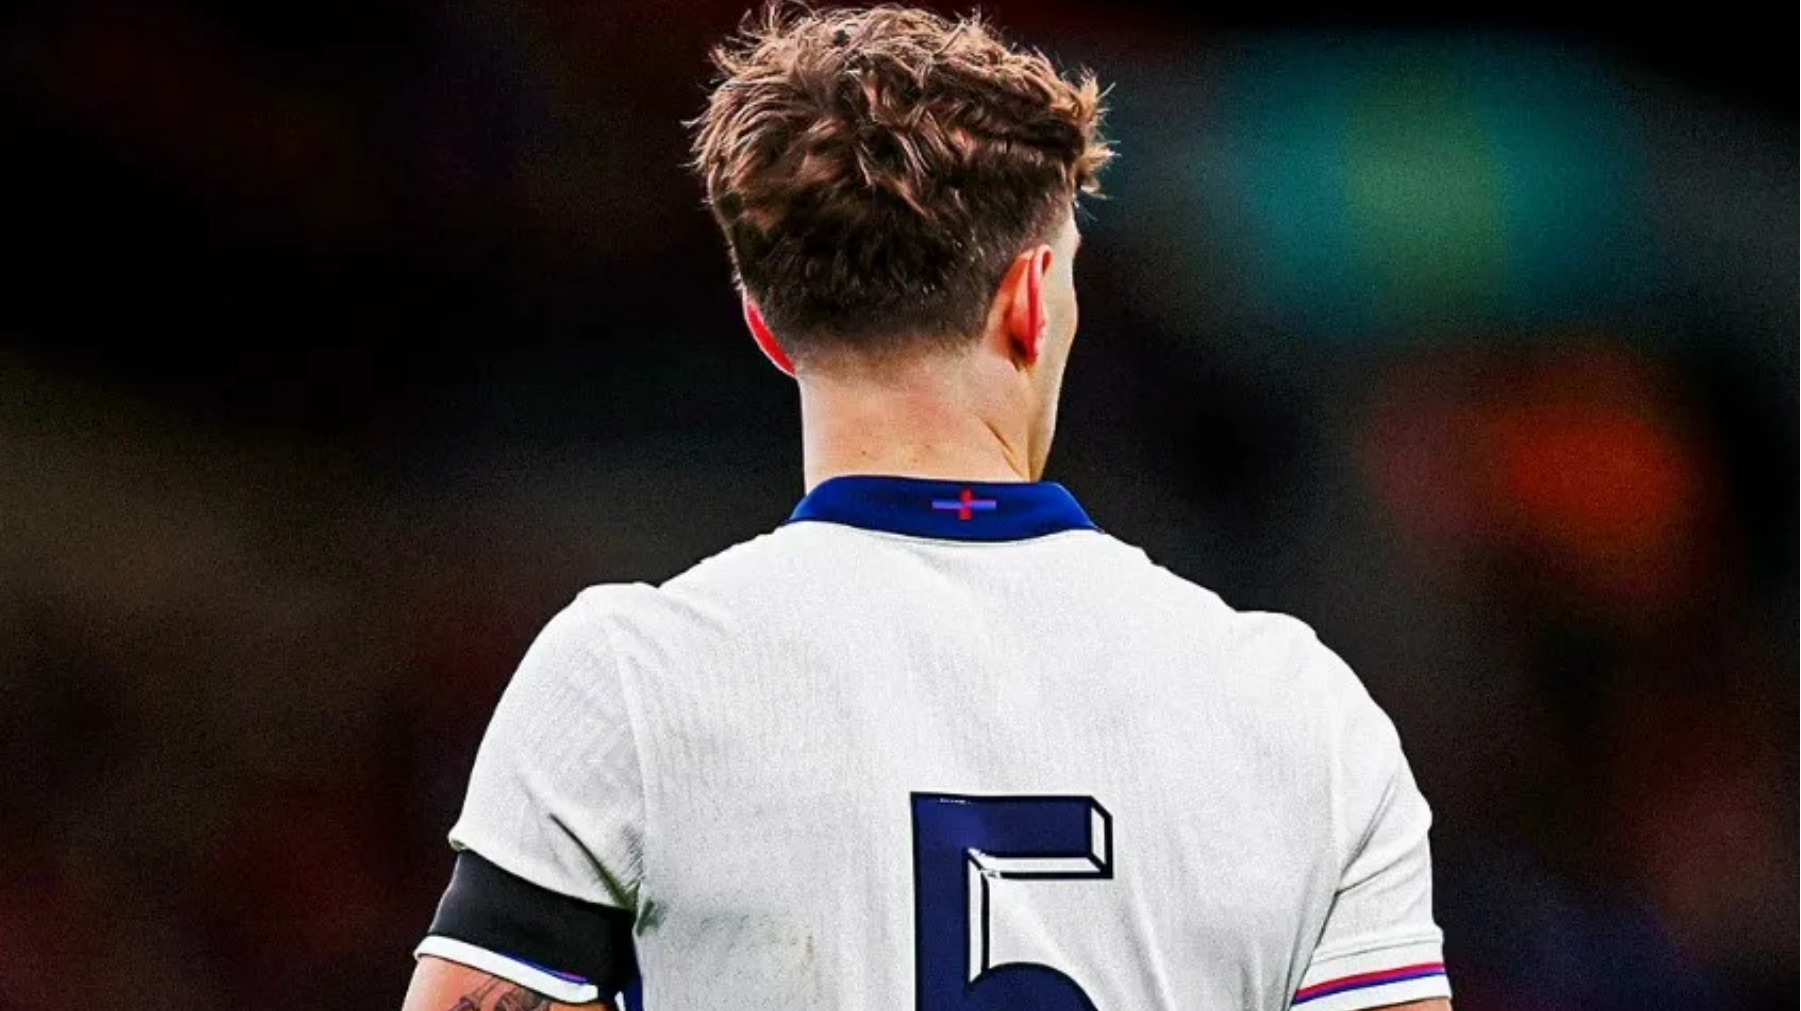 Why England players have no names on their shirts vs Belgium